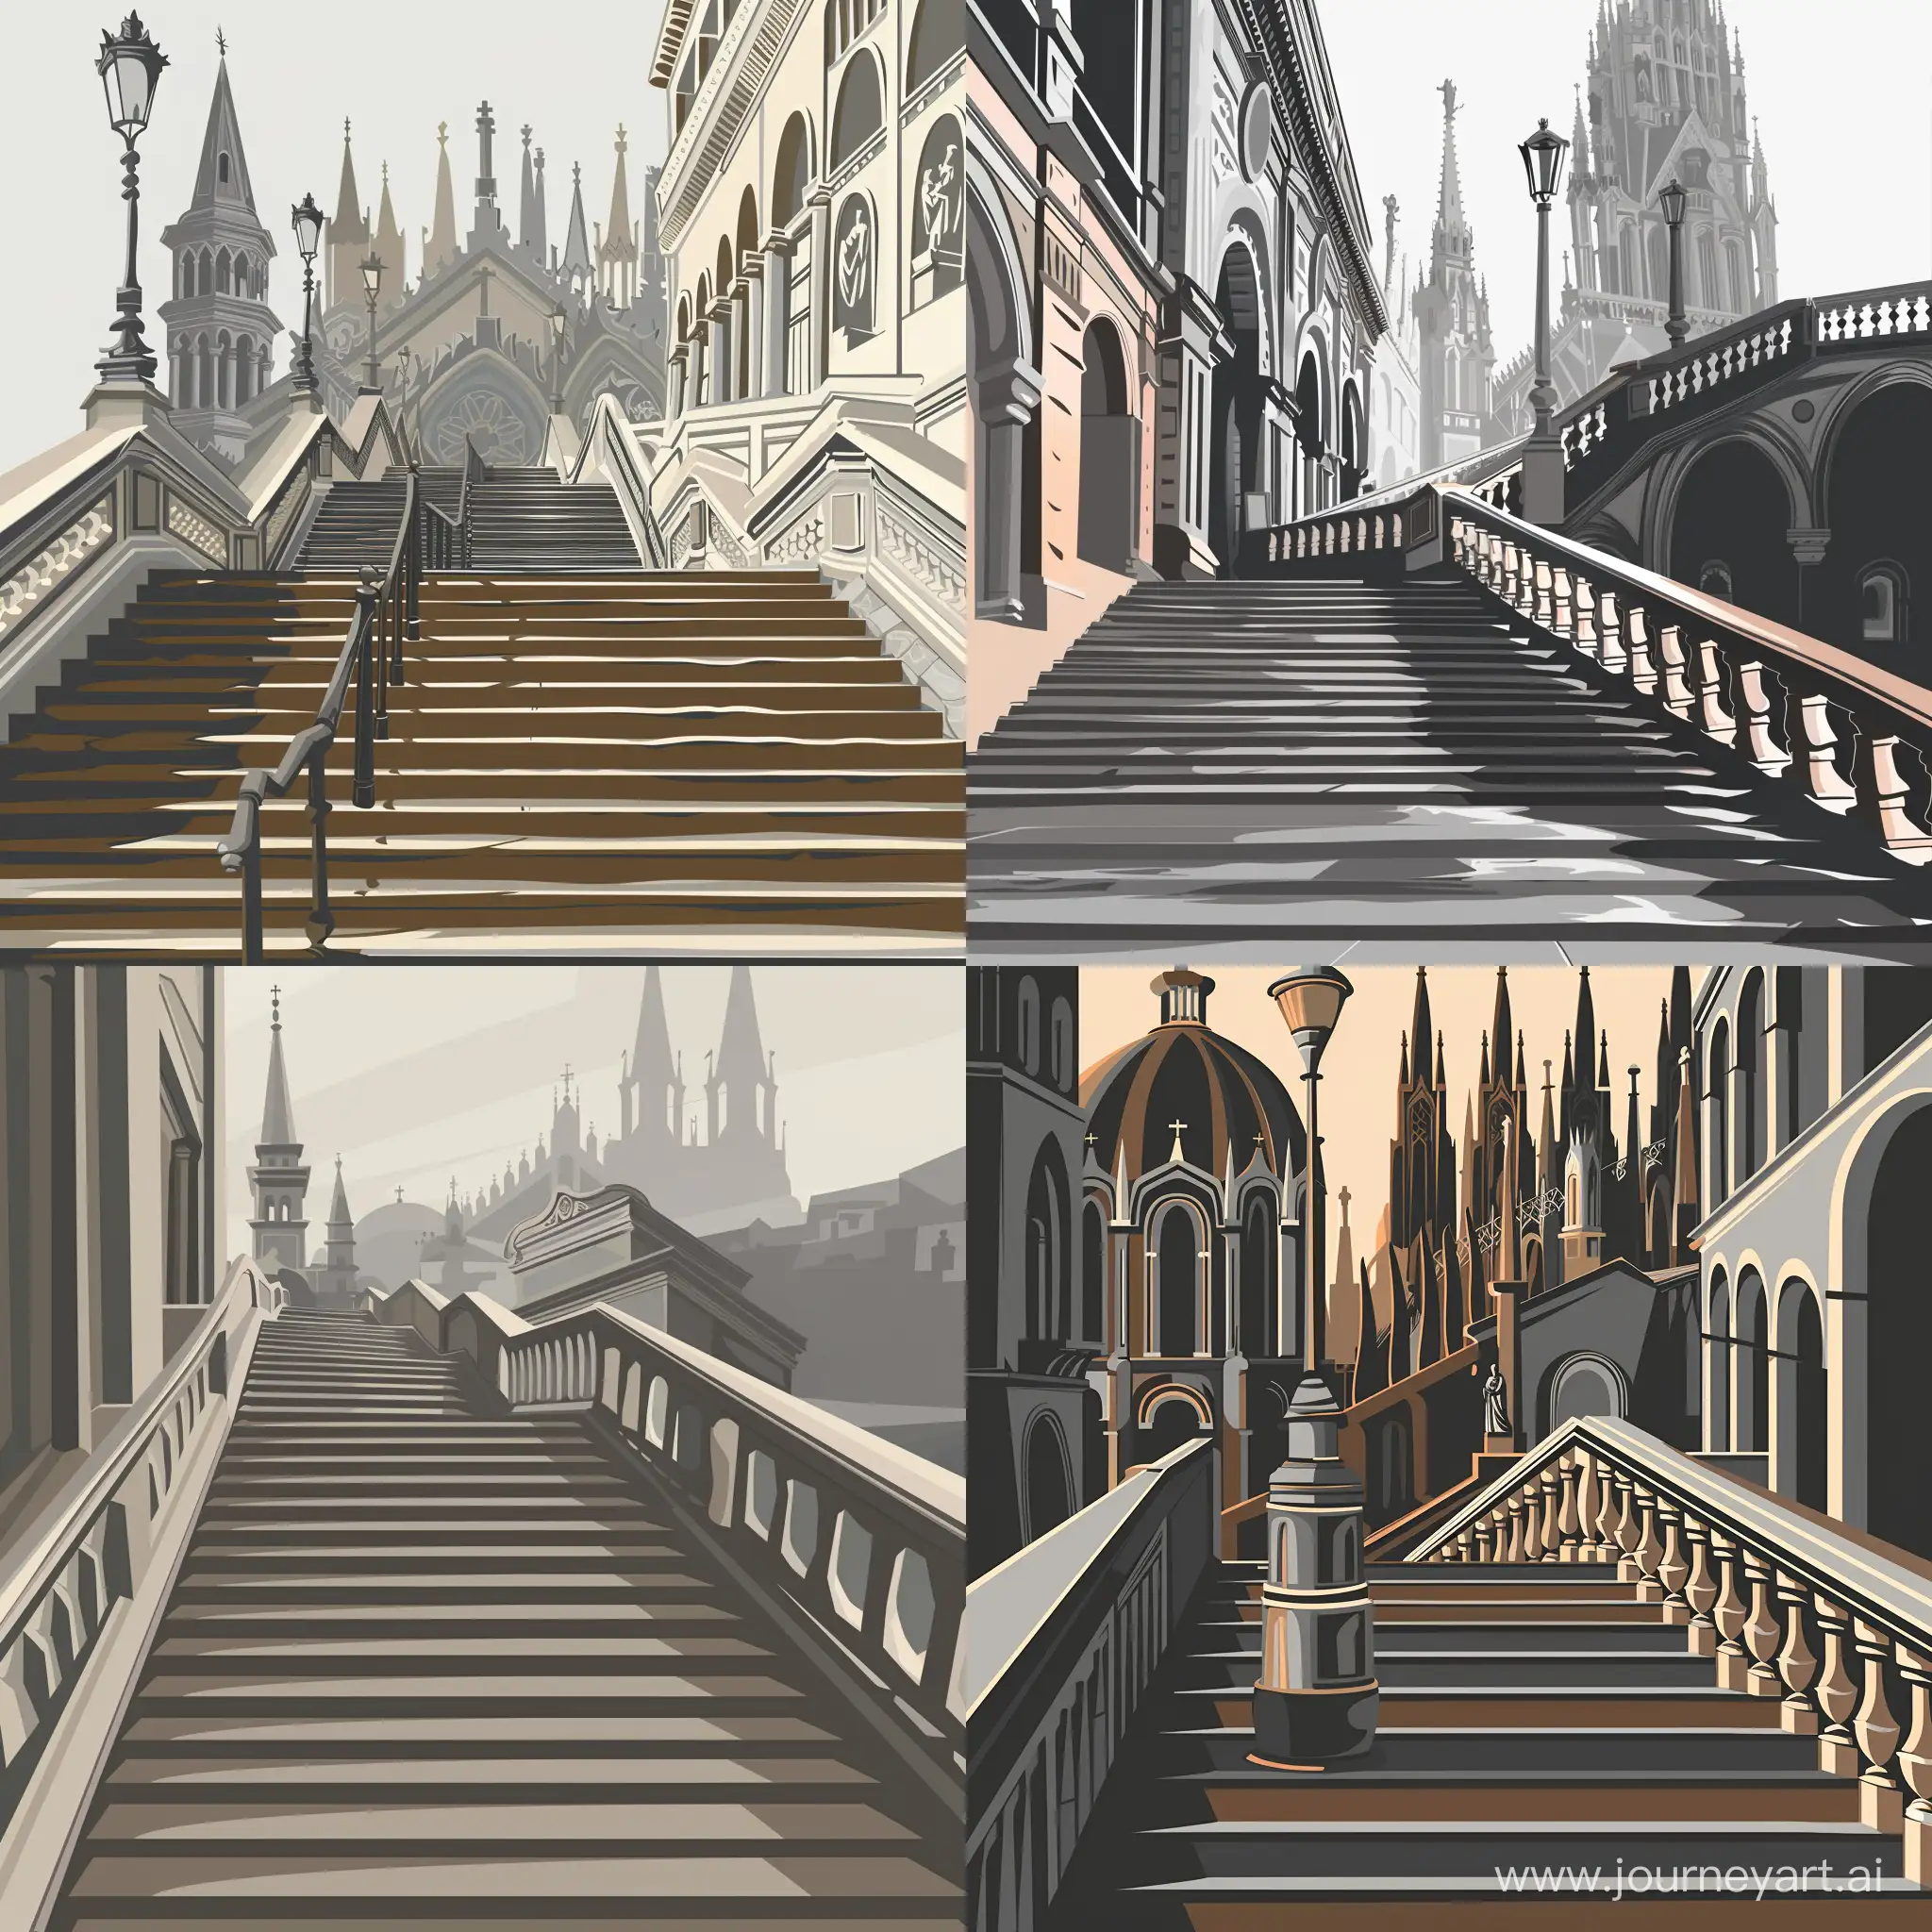 vector illustration of stairs leading to the cathedral, in the style of italian landscapes, terraced cityscapes, gray and brown, consumer culture critique, baroque nu-vintage, HD in vector style